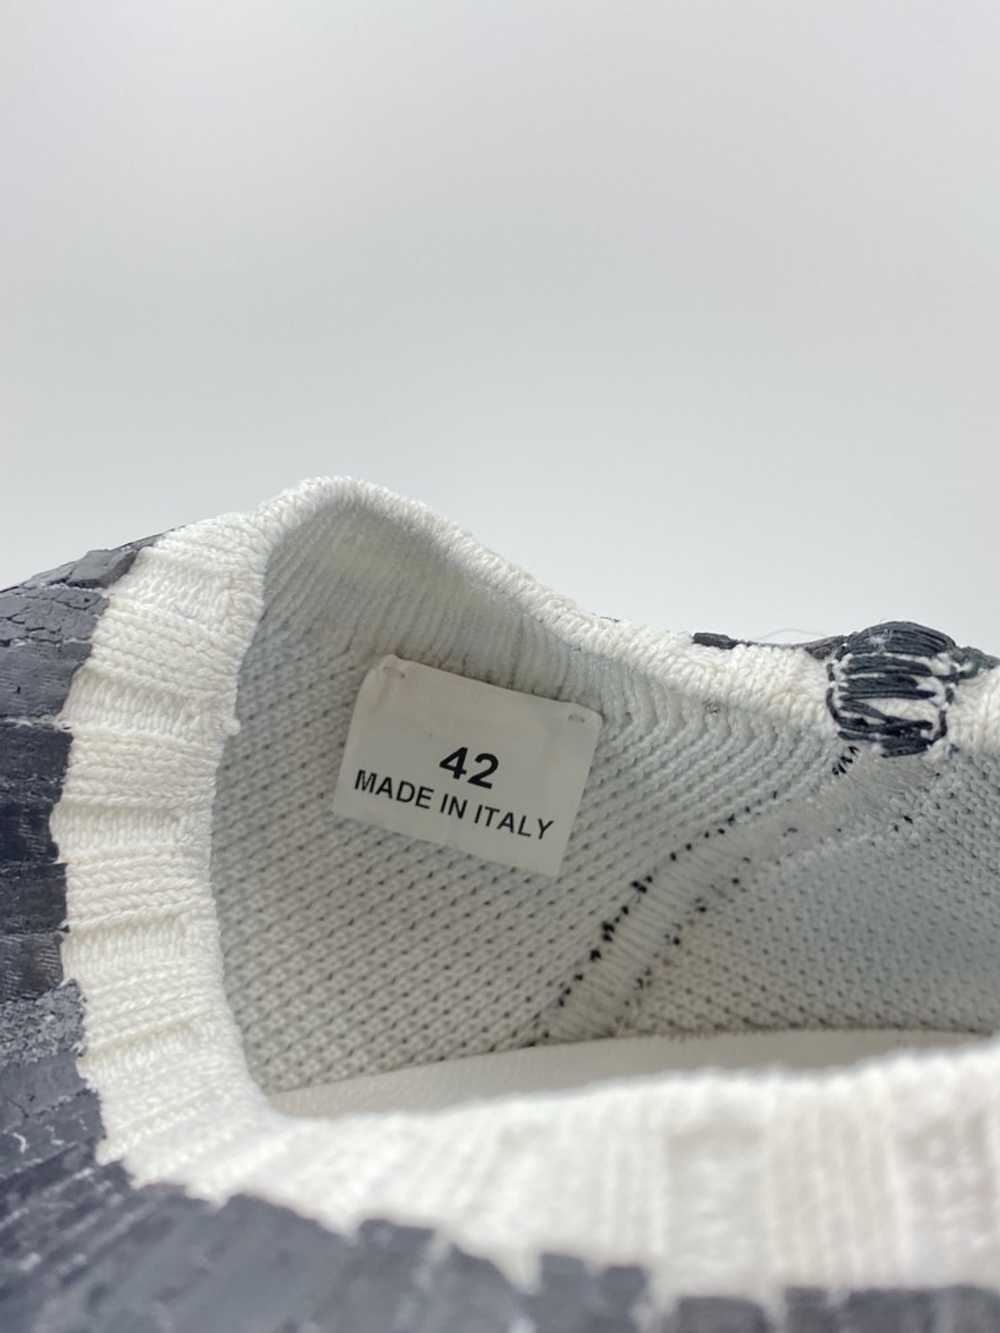 Maison Margiela Hand Painted Flyknit Runners - image 9